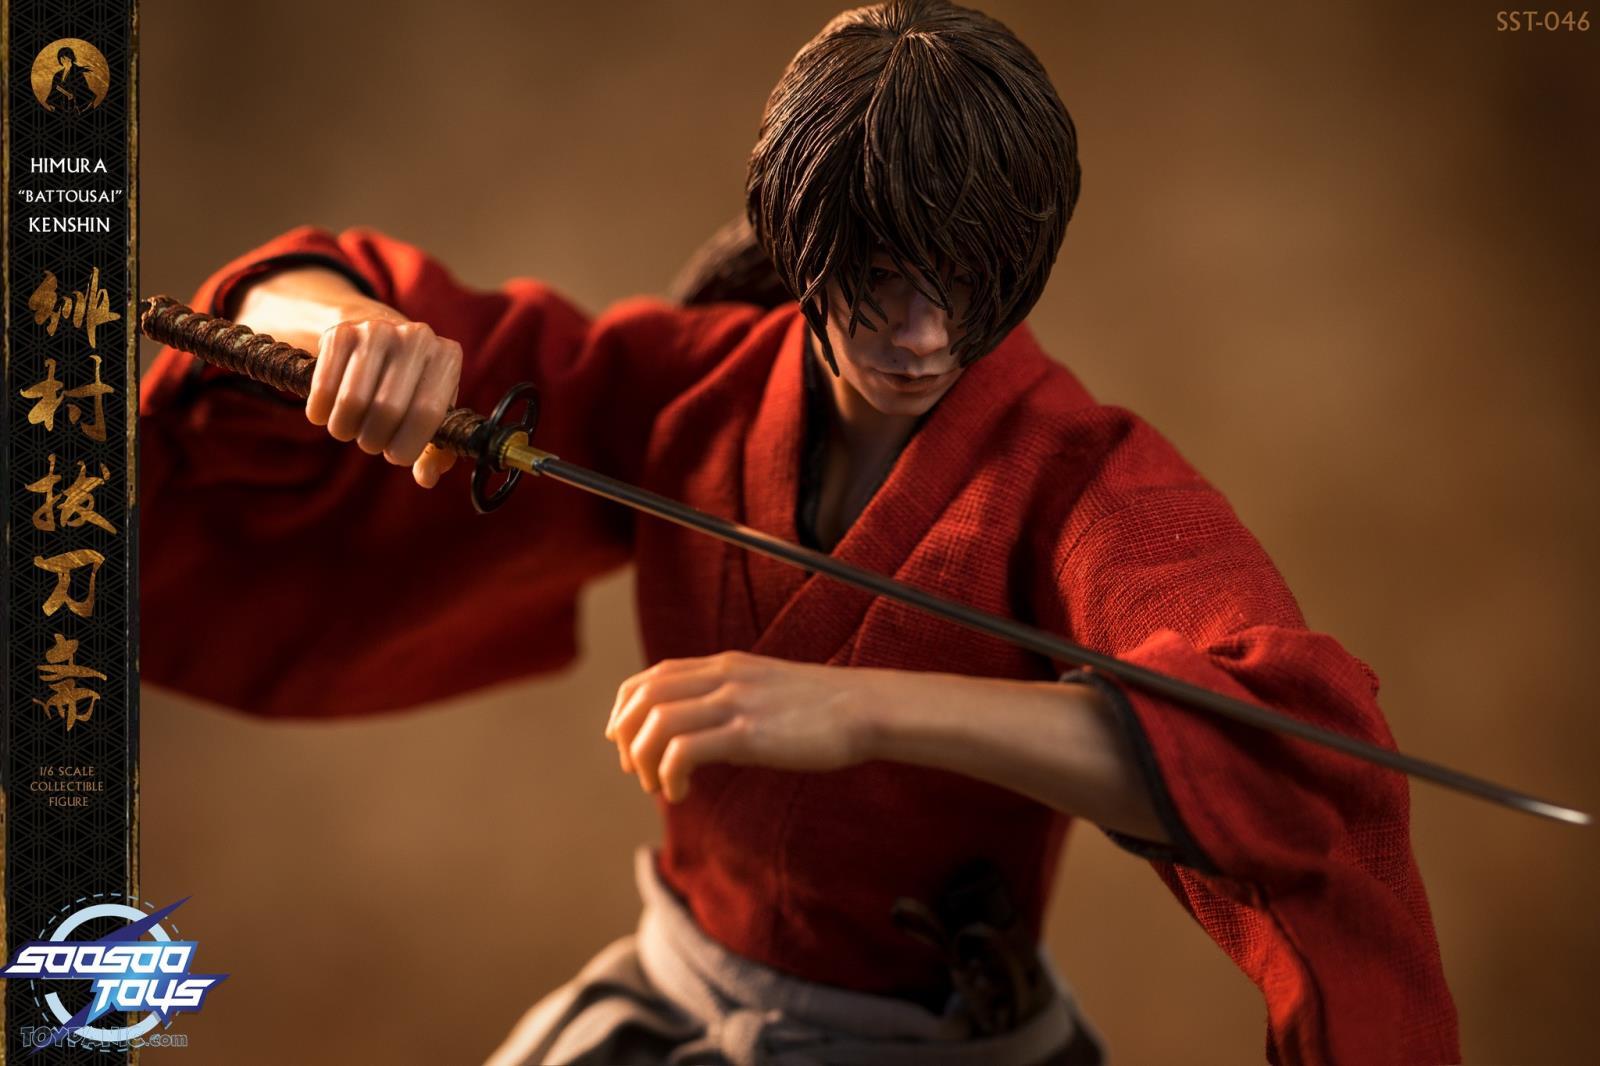 himura - NEW PRODUCT: 1/6 scale Rurouni Kenshin Collectible Figure from SooSooToys 712202251230PM_8303448